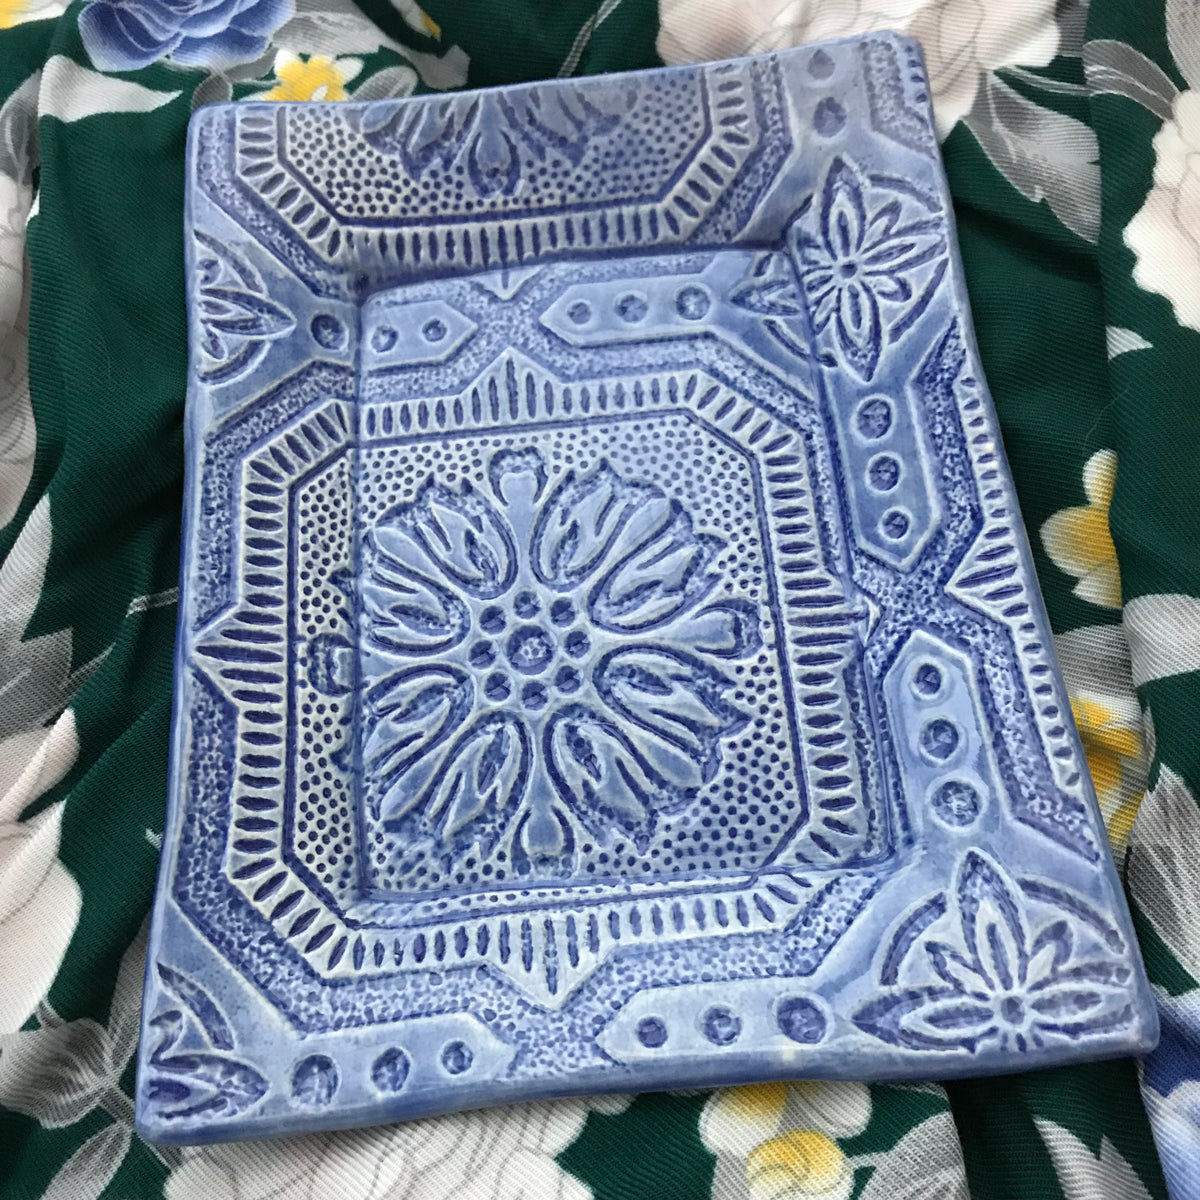 Indigo Blue Is A Trending Blue in Decor And Ceramics.  Ours Is  Used To Highlight Our Handmade Tray Created By The Potters Of Lorraine Oerth Studio.